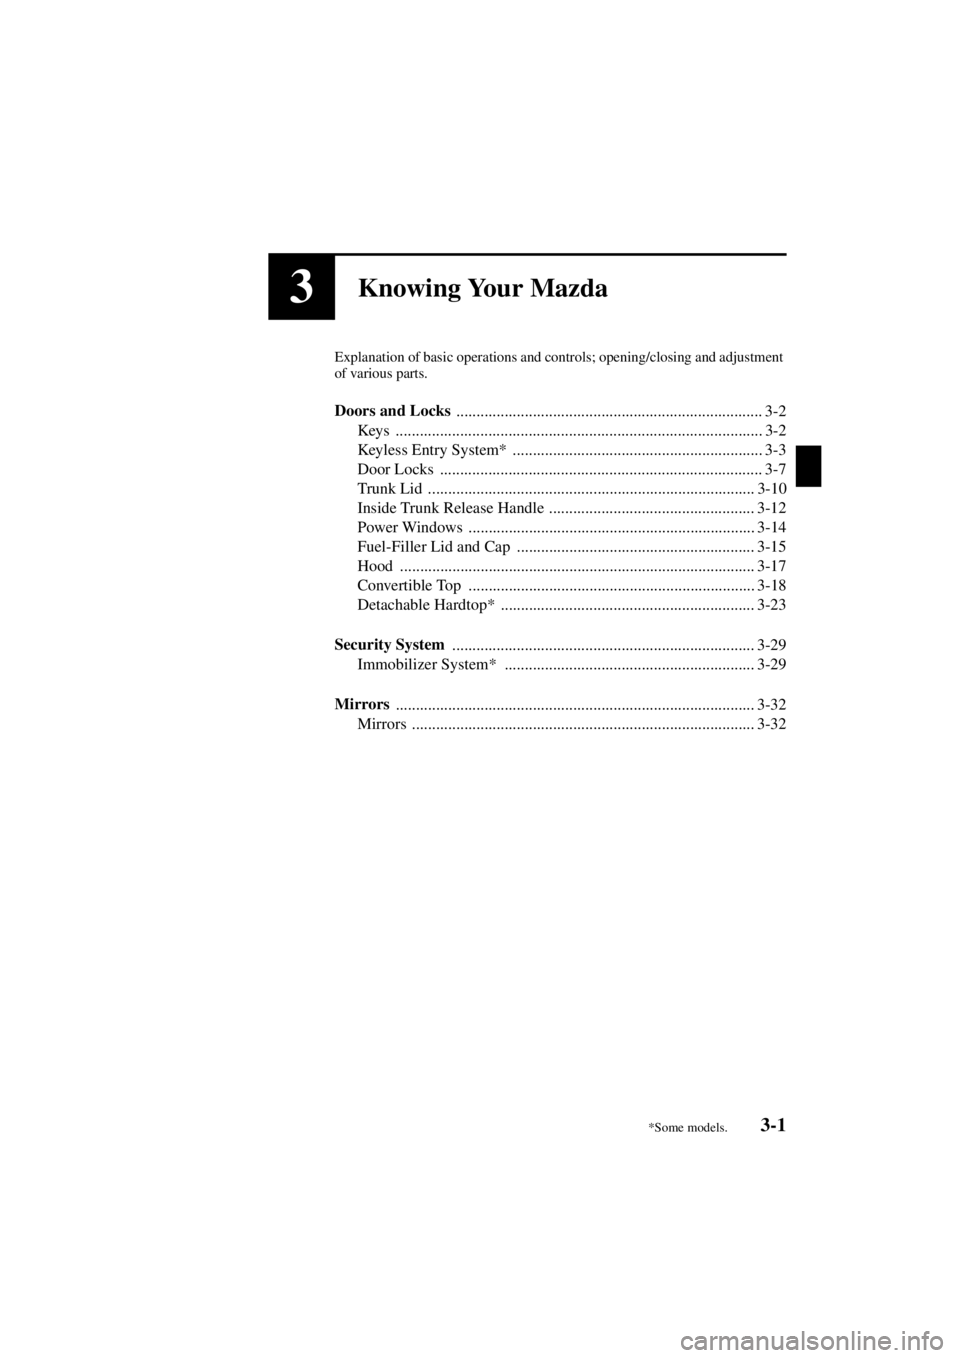 MAZDA MODEL SPEED MX-5 MIATA 2004 Owners Guide 3-1
Form No. 8T02-EA-03L
3Knowing Your Mazda
Explanation of basic operations and controls; opening/closing and adjustment 
of various parts.
Doors and Locks ...........................................